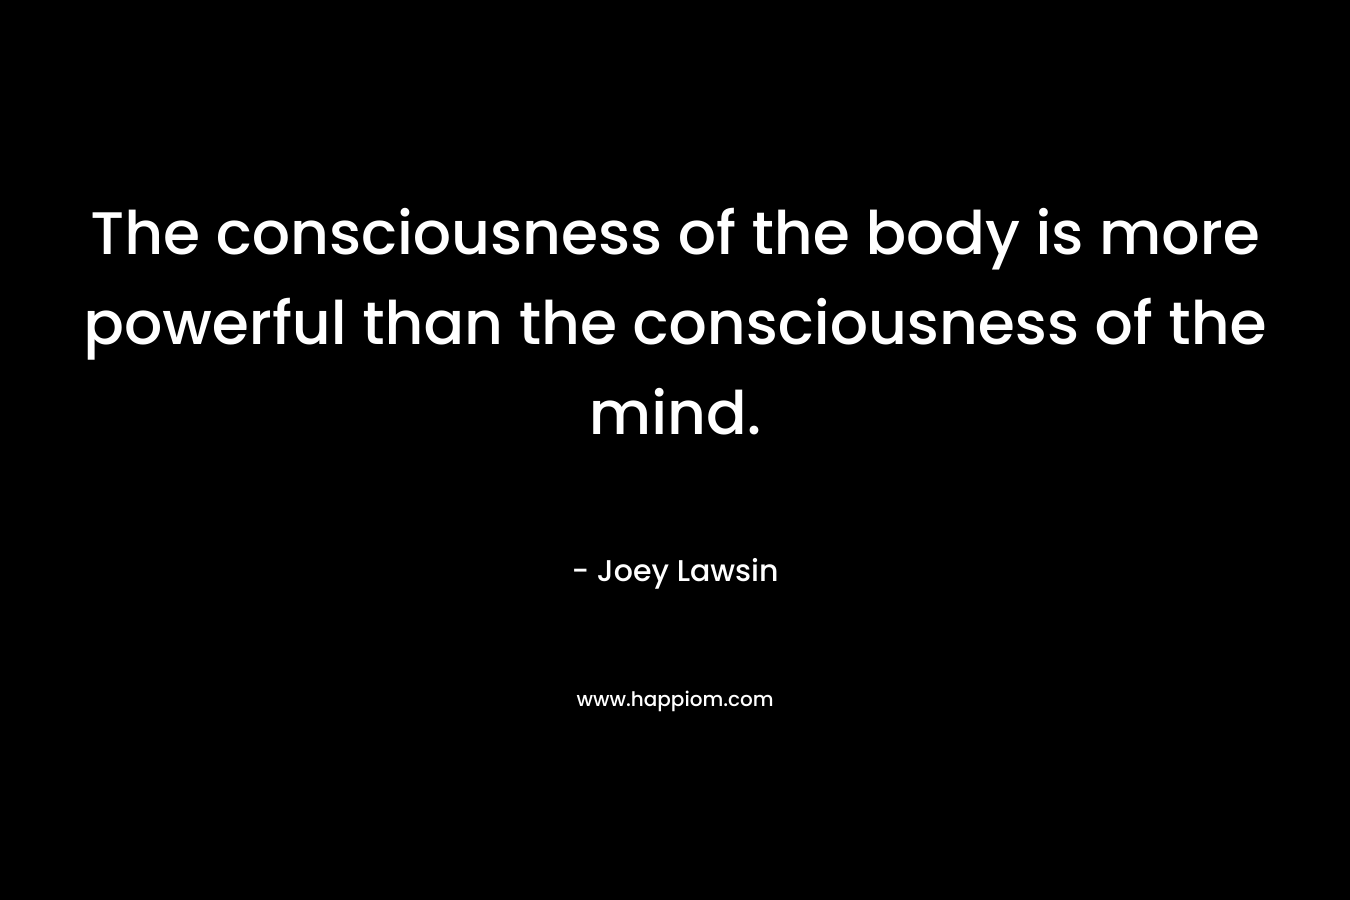 The consciousness of the body is more powerful than the consciousness of the mind. – Joey Lawsin